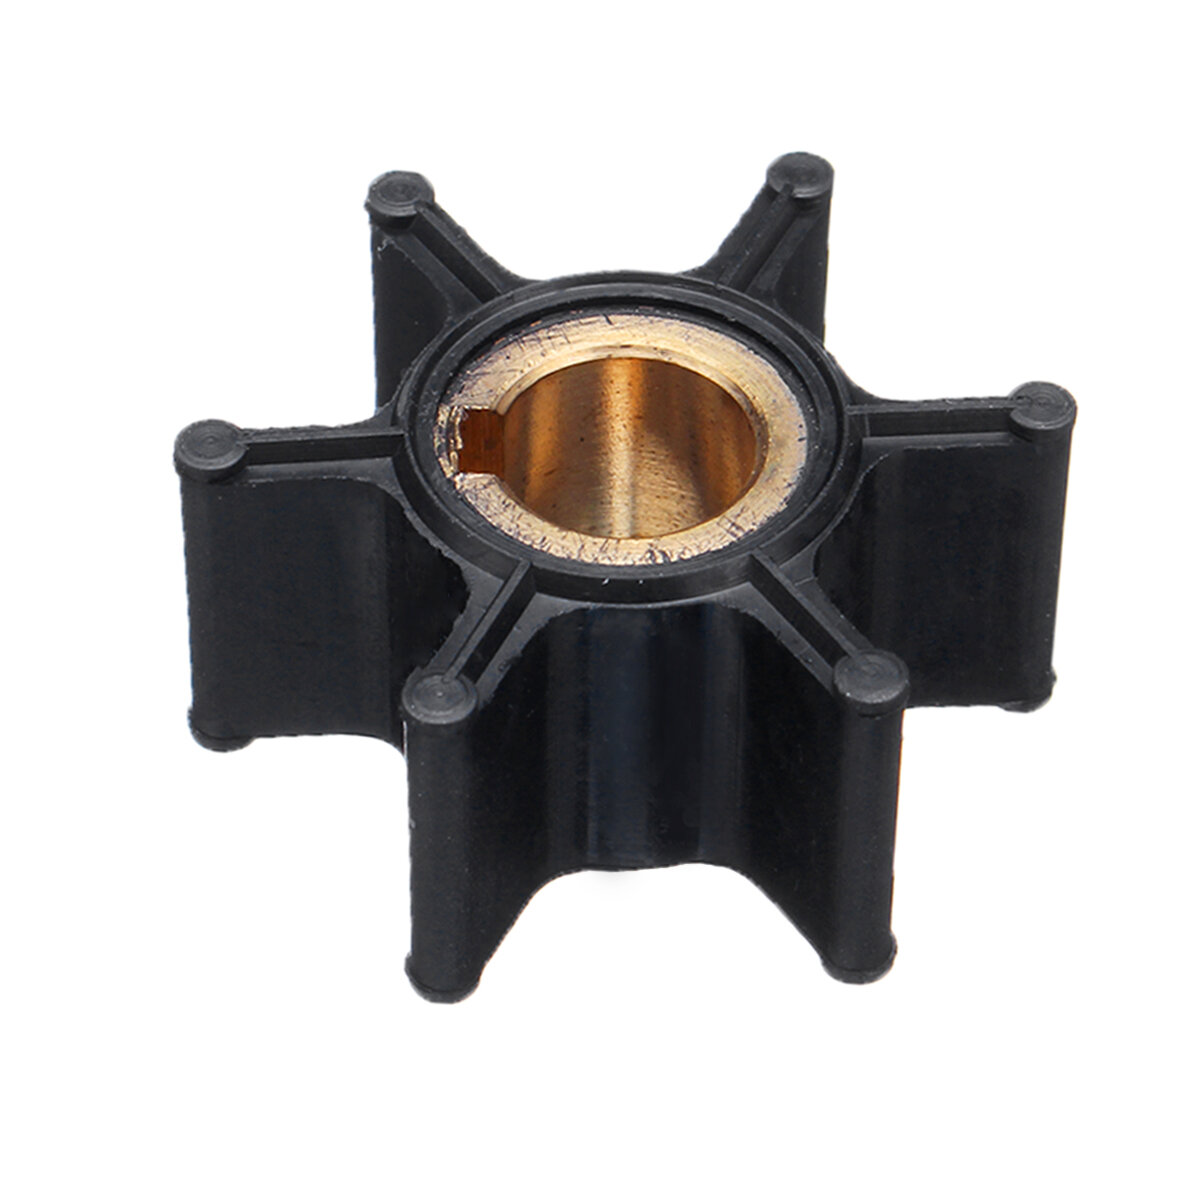 

Water Pump Impeller 387361/763735 for Johnson Evinrude OMC BRP 2-6HP Outboard Motor